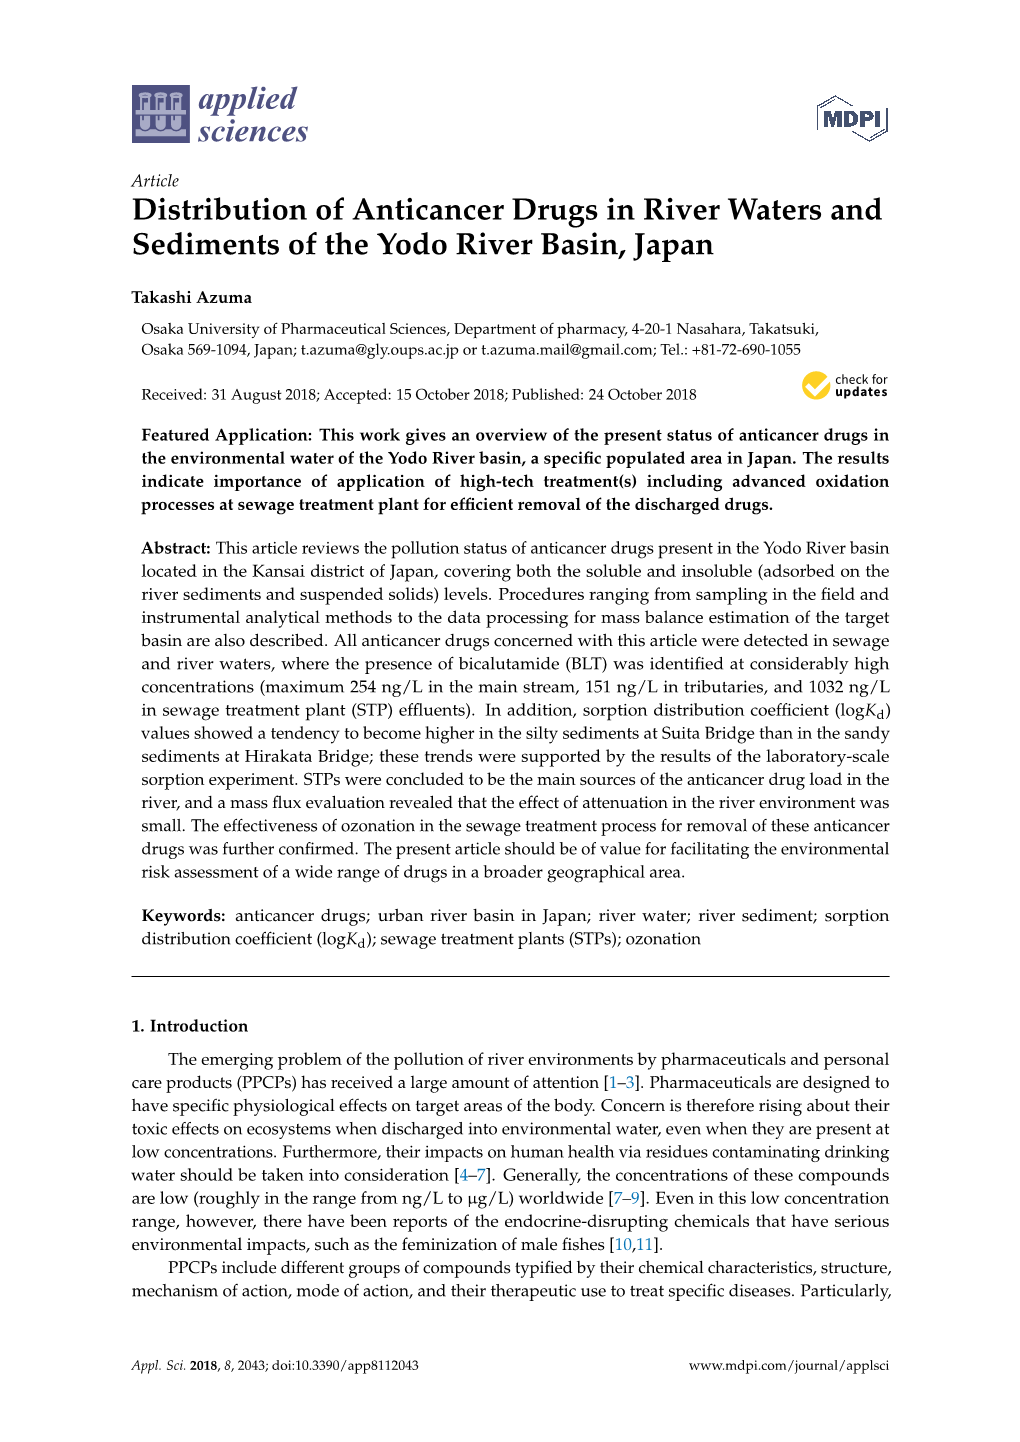 Distribution of Anticancer Drugs in River Waters and Sediments of the Yodo River Basin, Japan